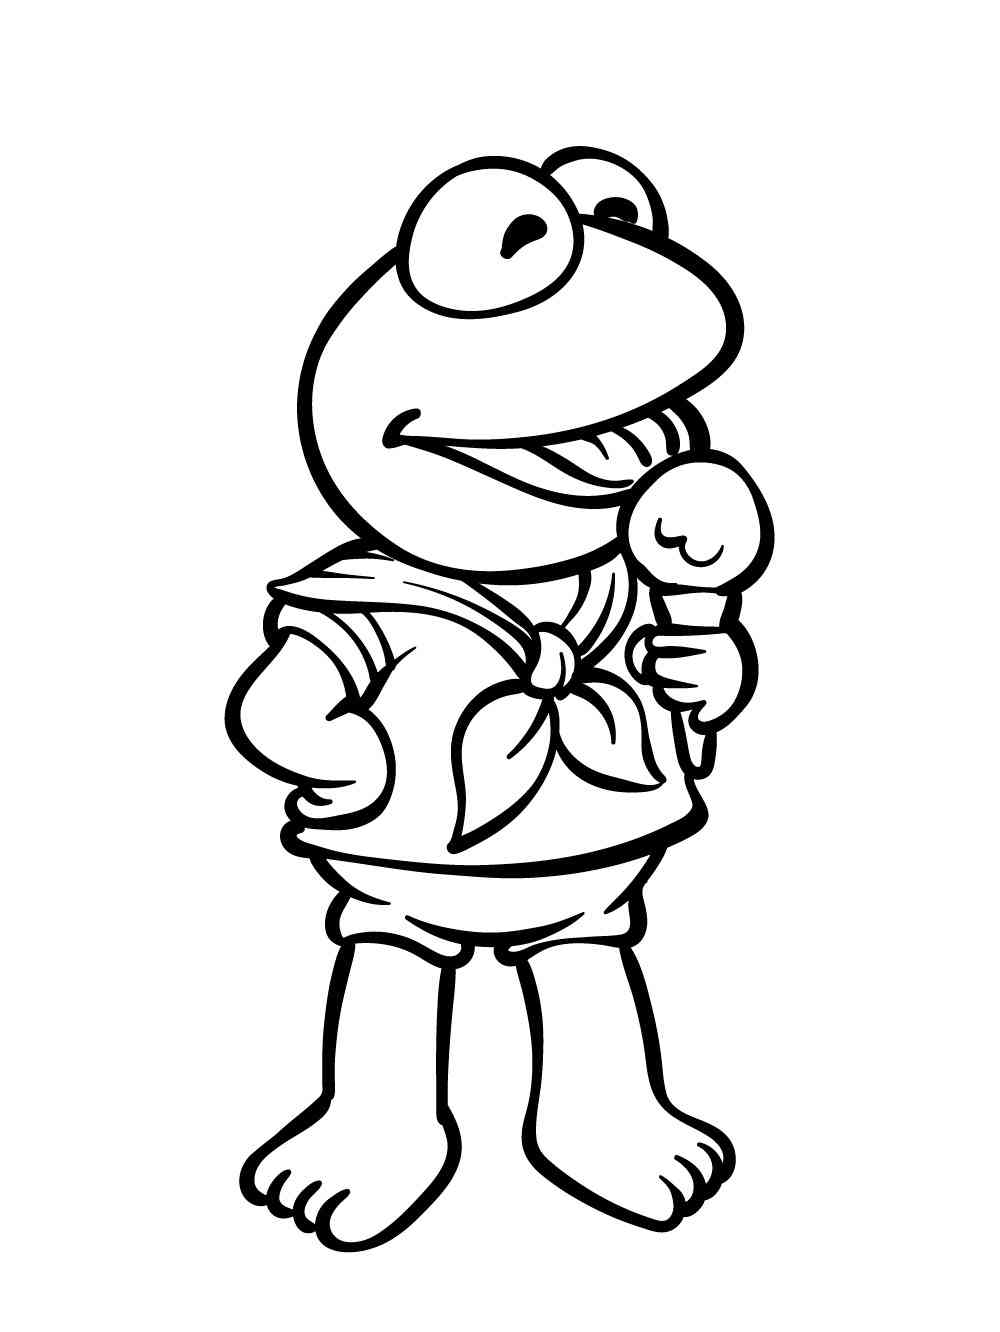 muppet babies coloring pages